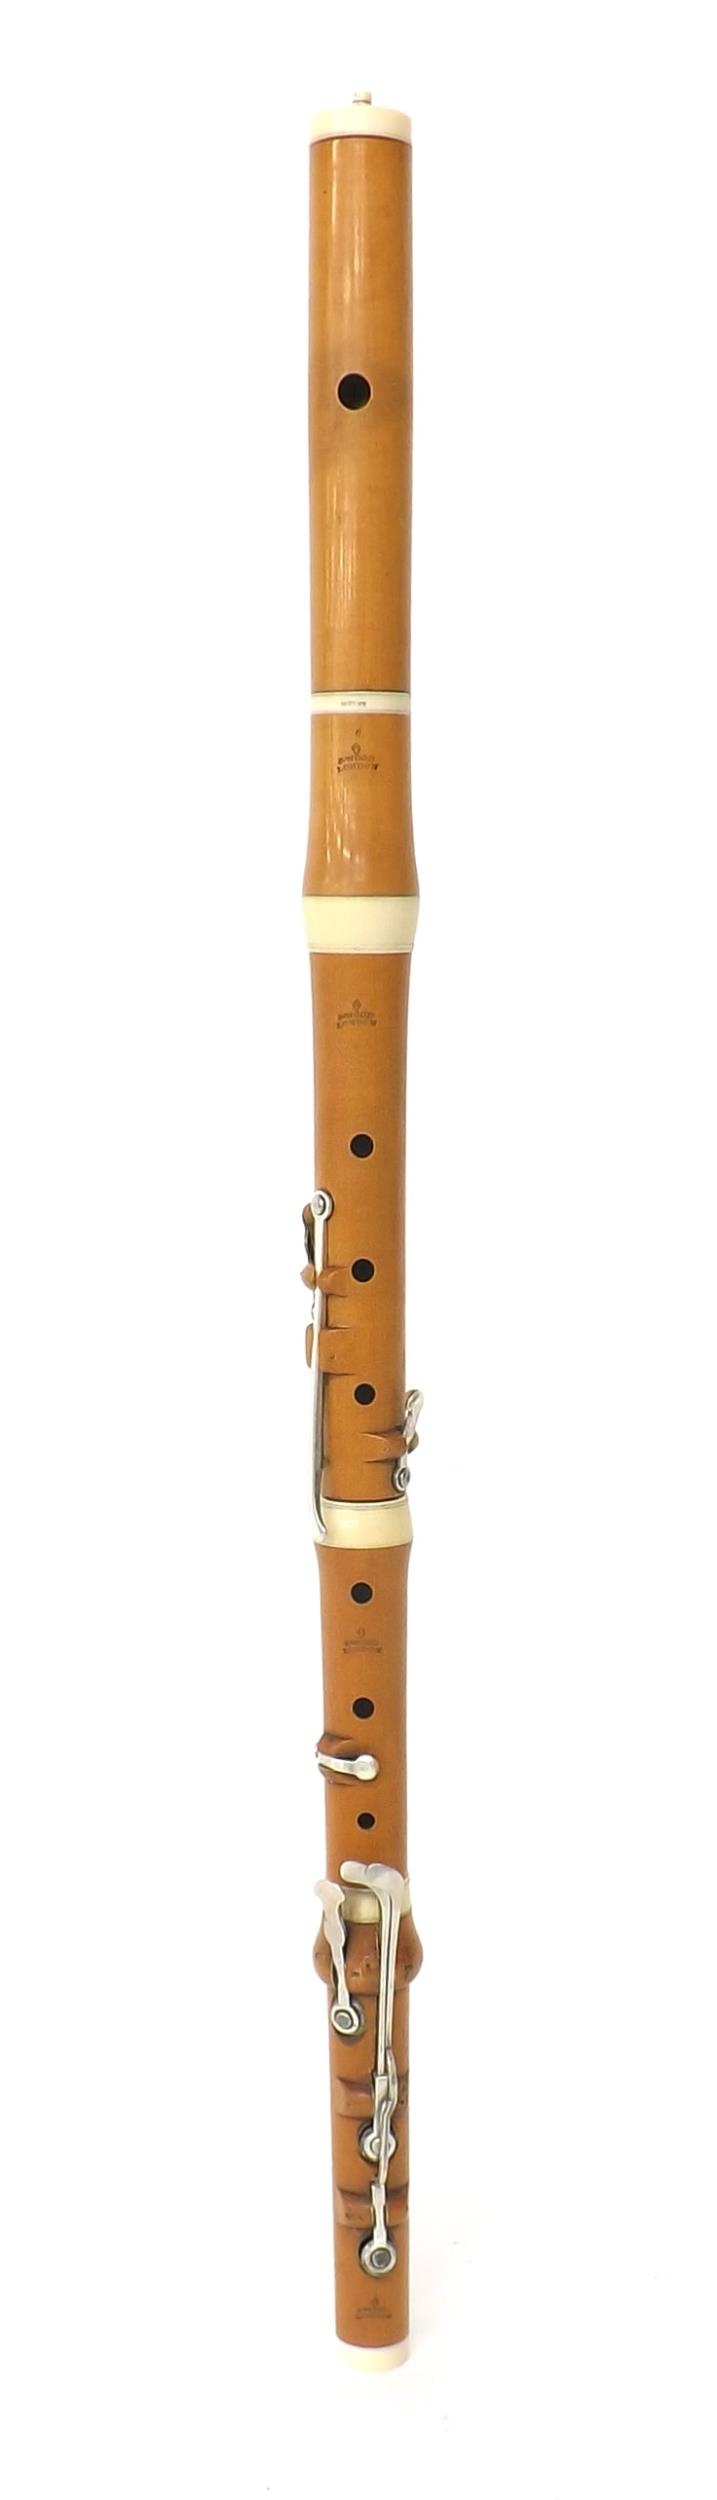 Boxwood and ivory flute by and stamped J. Wood, London, with eight silver keys on wooden blocks,